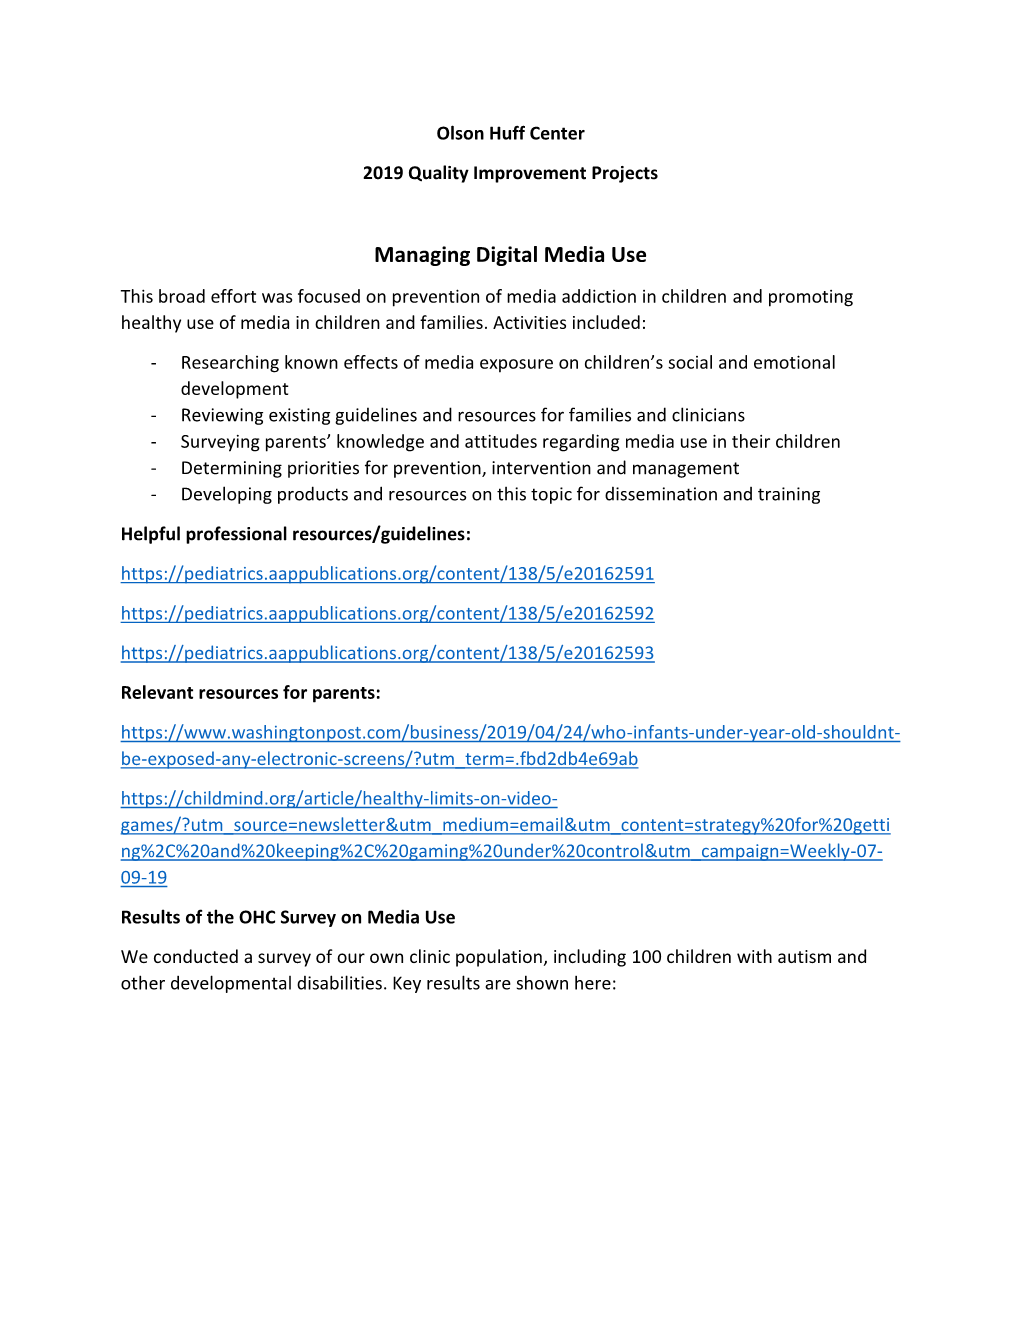 Managing Digital Media Use in Children with Disabilities